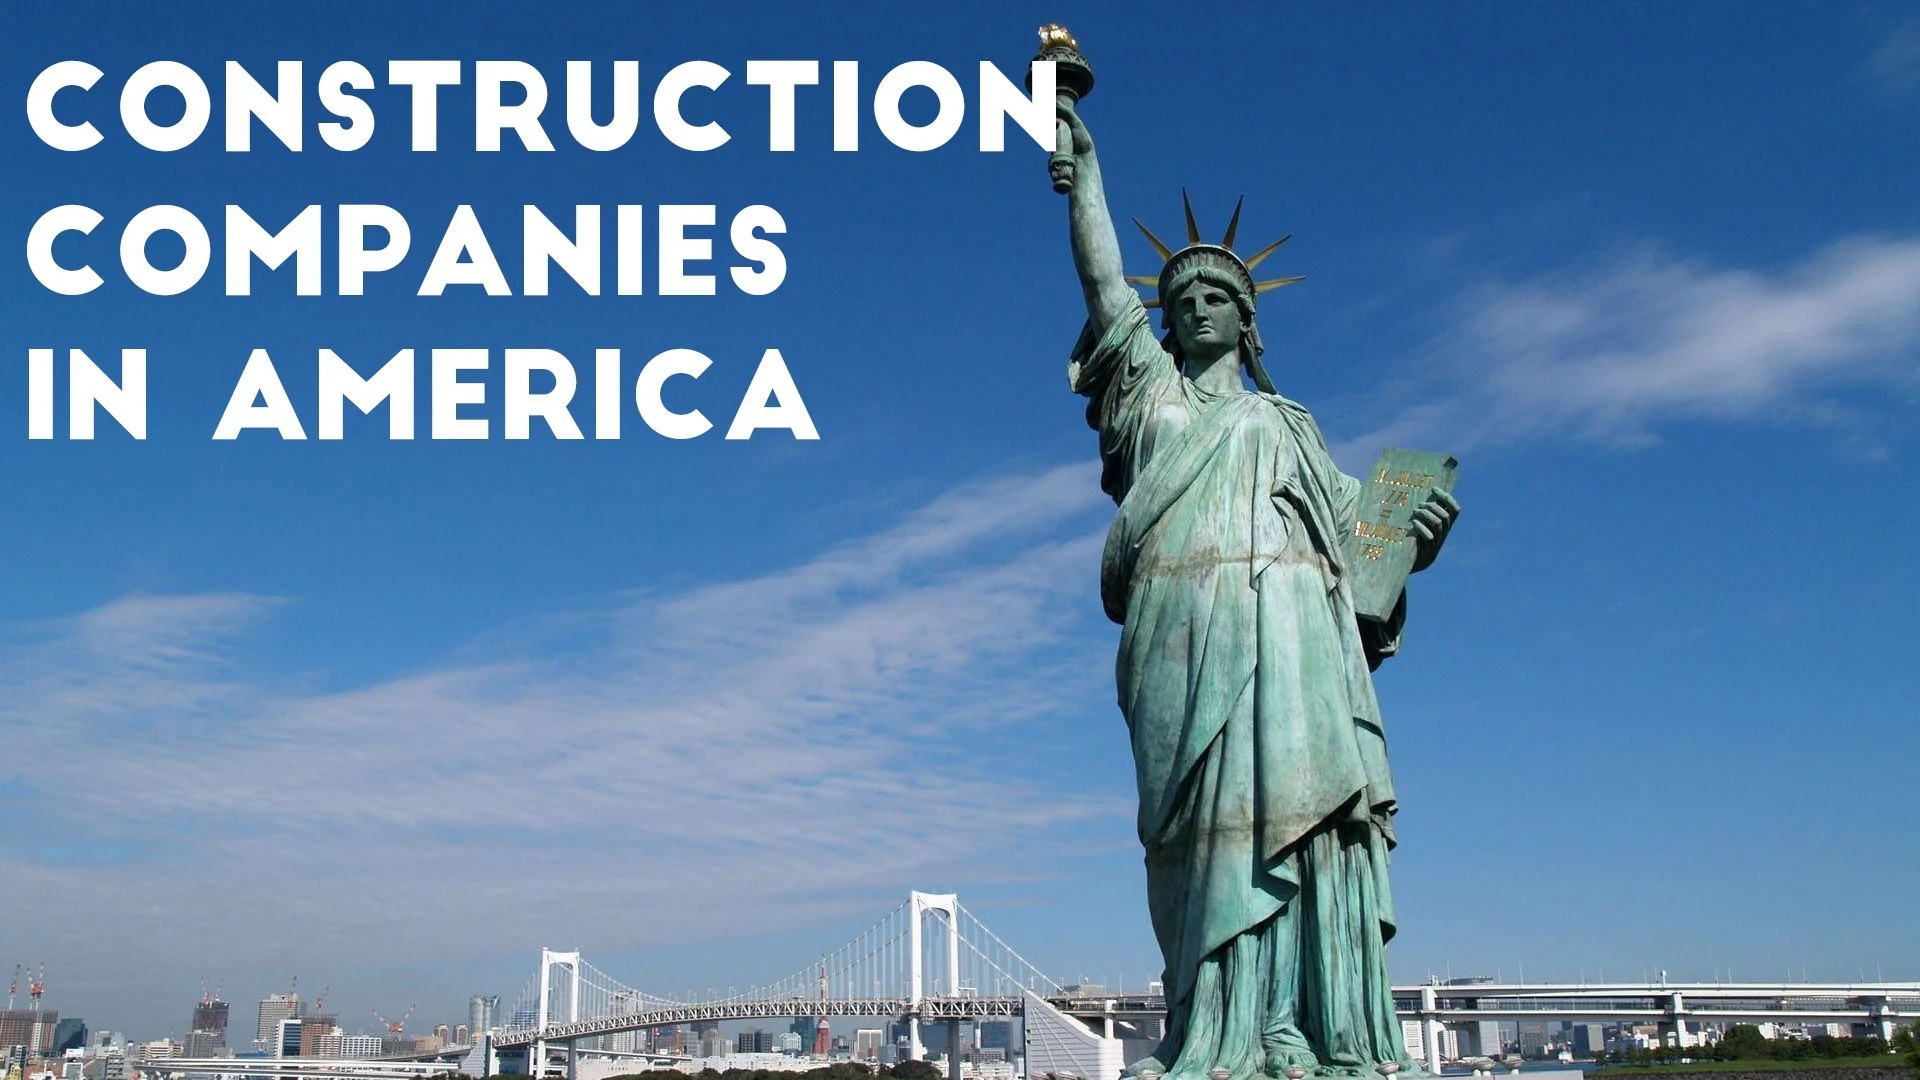 Construction Companies in America